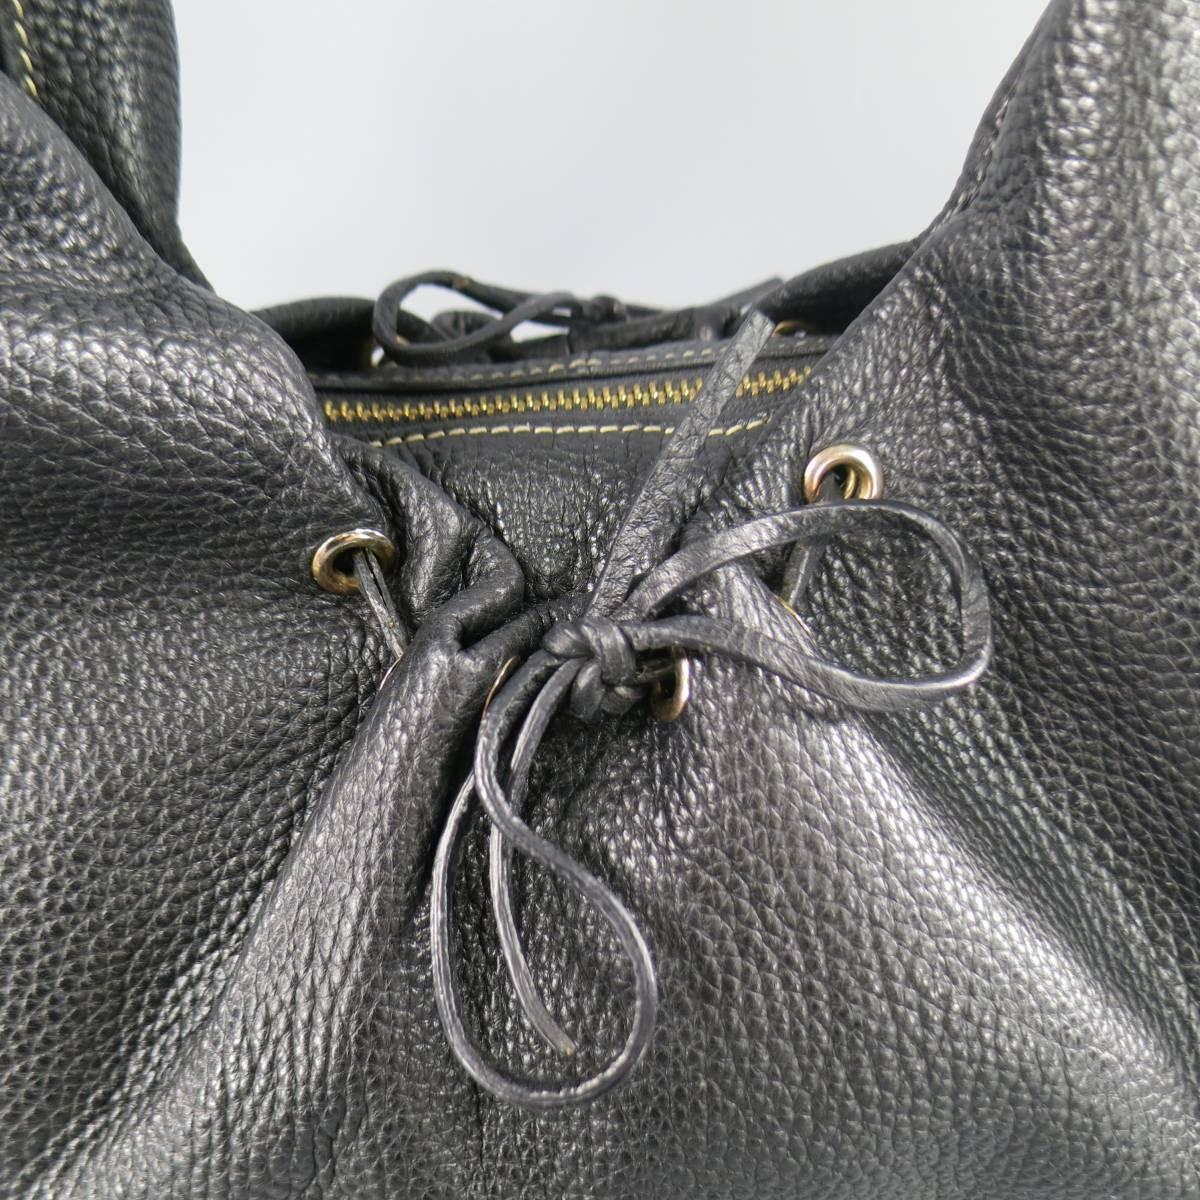 This lovely BOTTEGA VENETA hobo bag comes in smooth black pebble textured leather and features a contrast stitch shoulder strap with gold tone hoops, gathered middle with grommets and woven leather ties, side grommets braided leather engraved